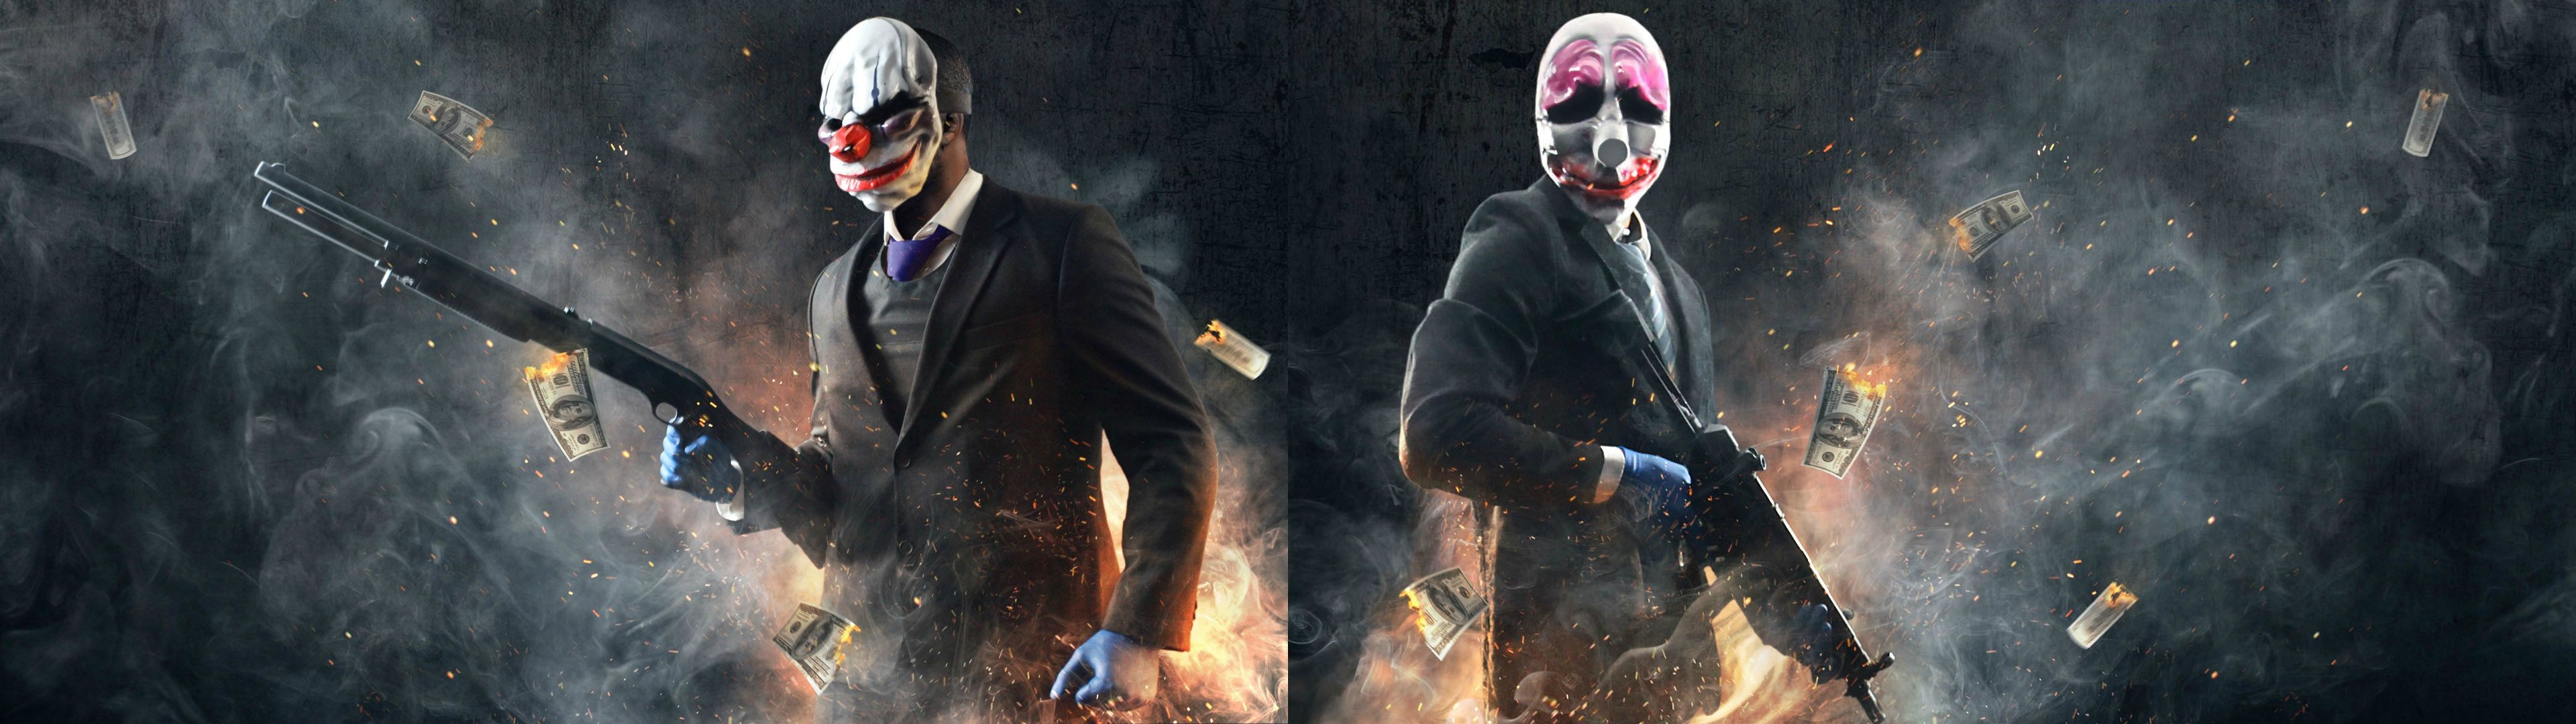 A Payday 2 Dual Monitor Wallpaper I Made From Steam - 3840x1080 Wallpaper -  